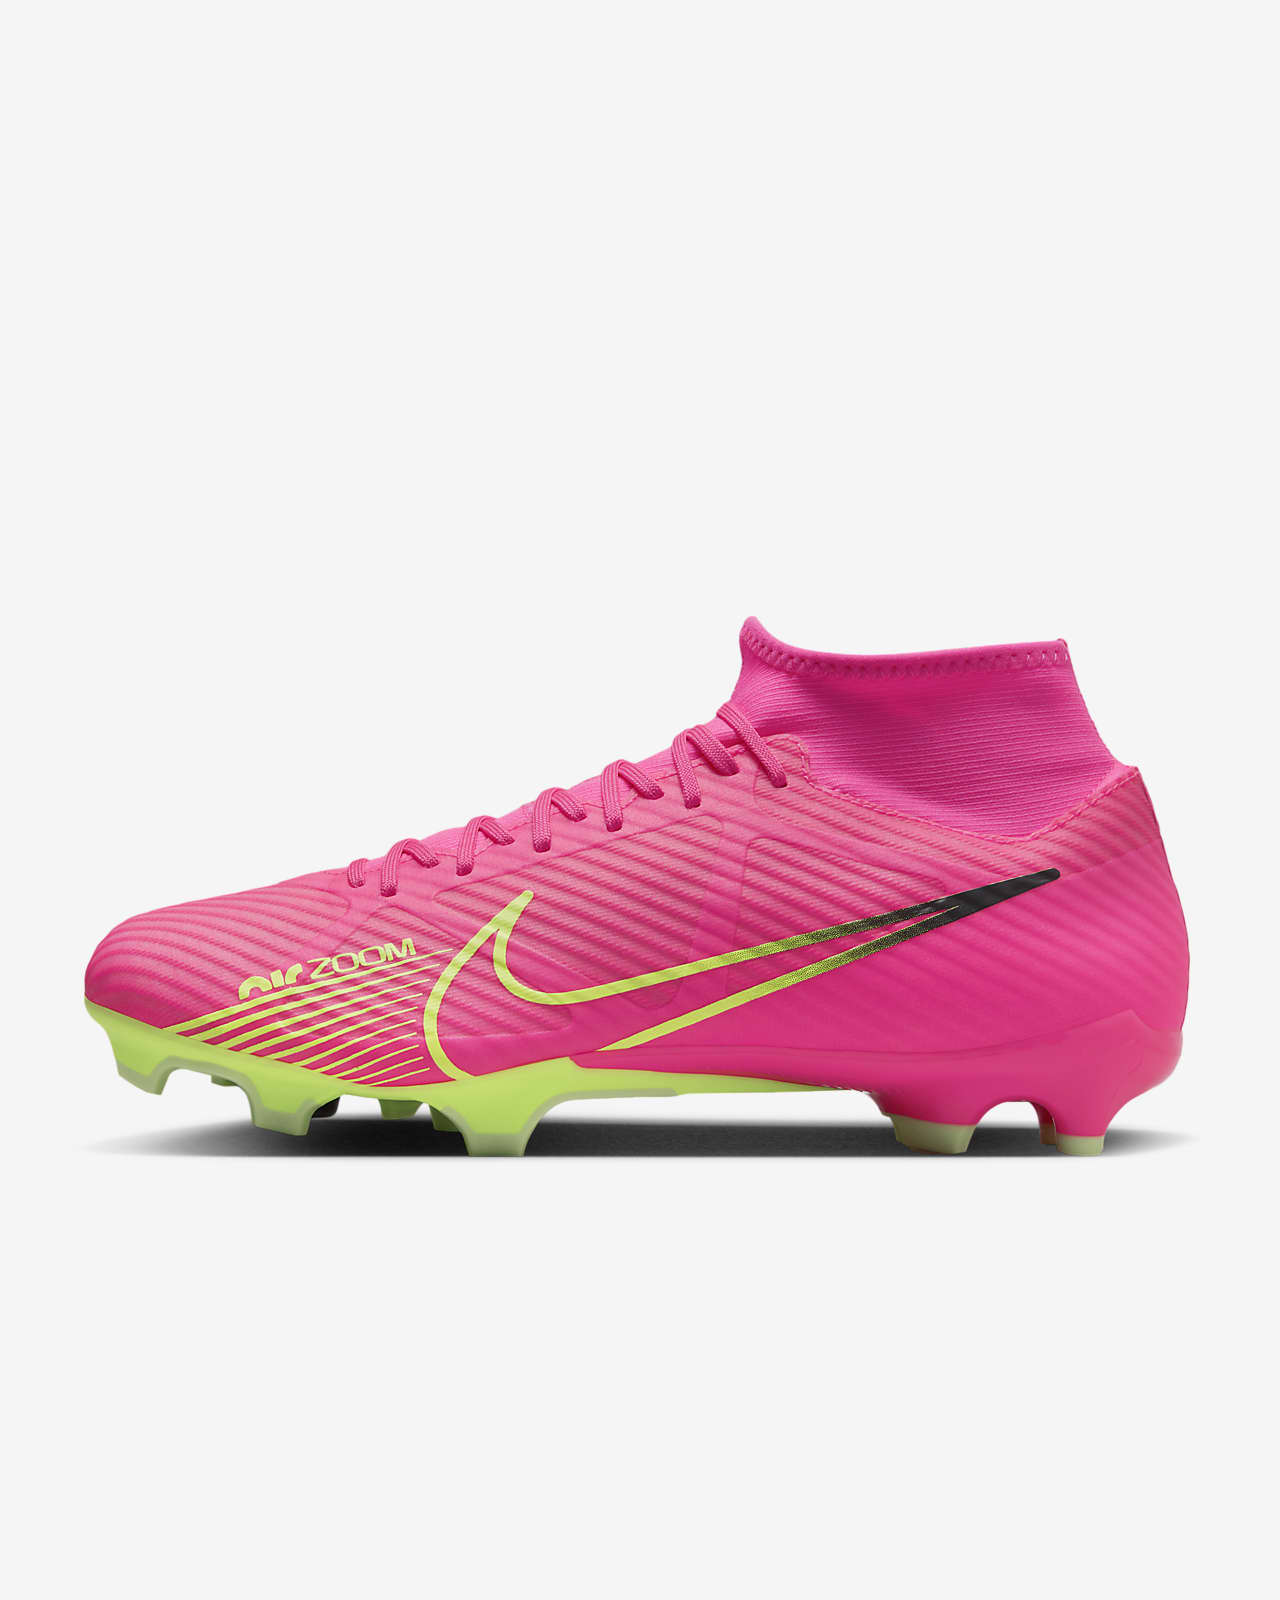 Chaussure de football multi-surfaces à crampons Nike Zoom Mercurial 9 Academy MG. Nike FR